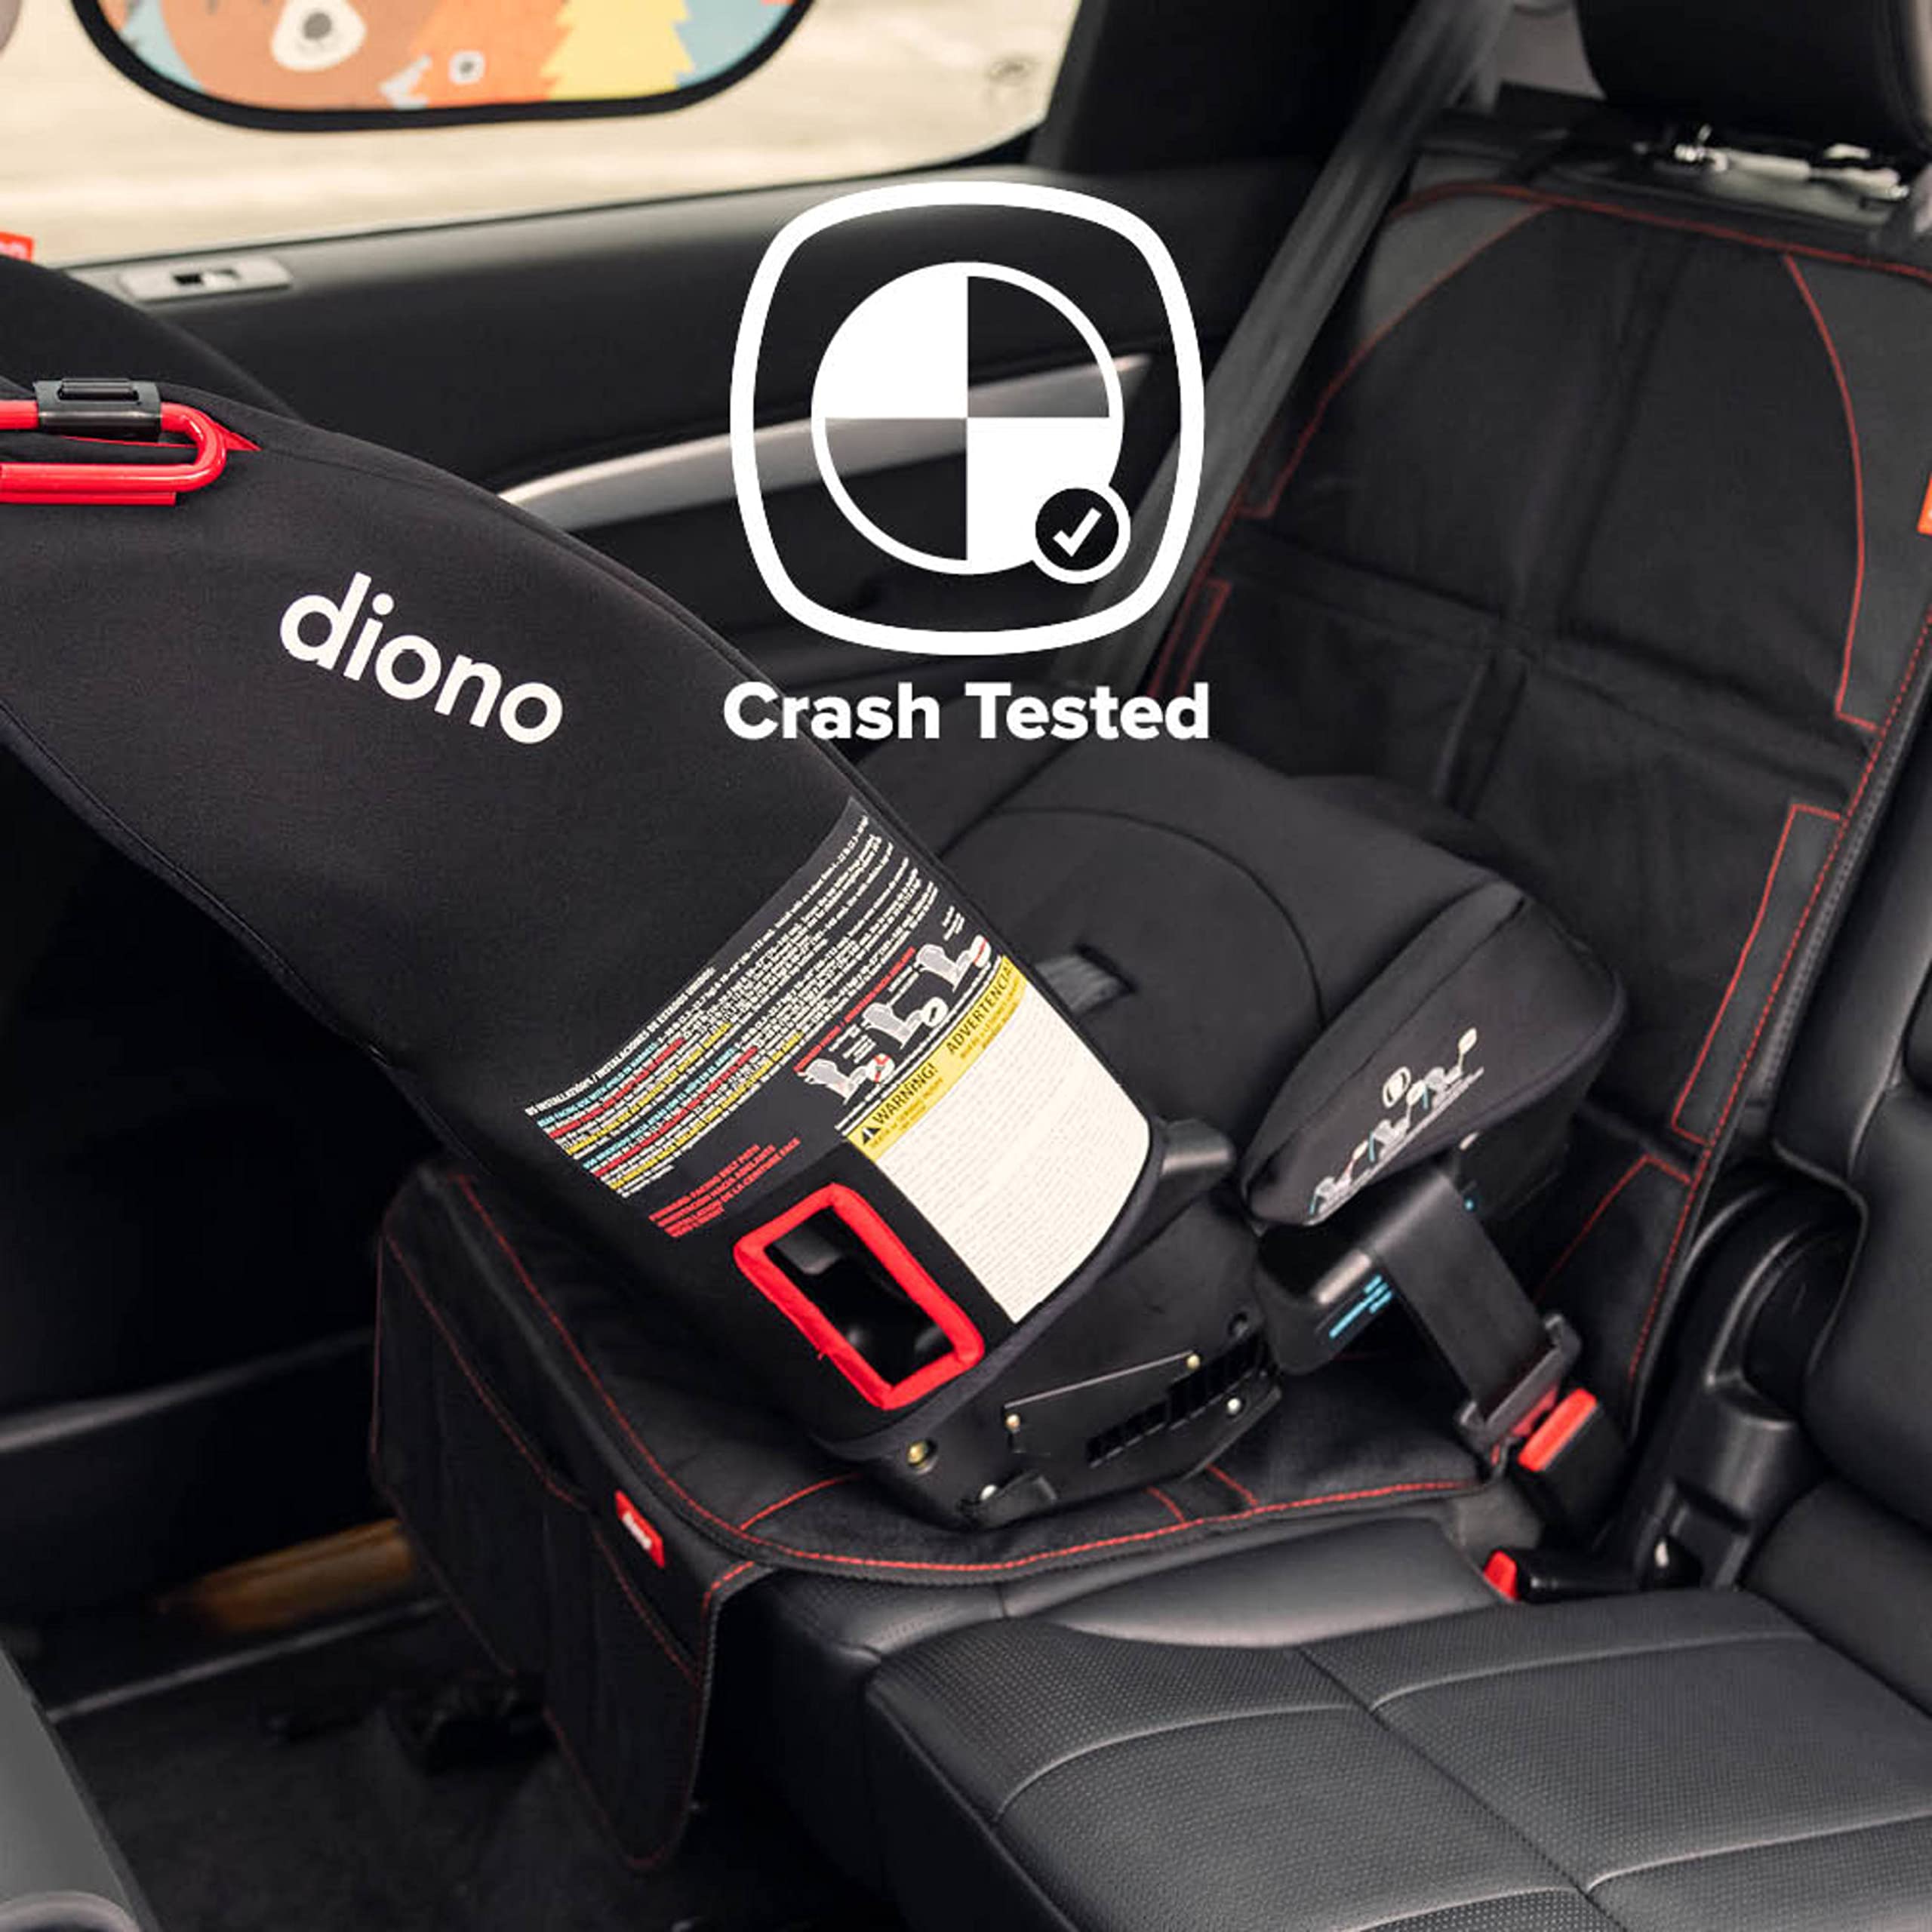 Diono Ultra Mat Complete Back Seat Upholstery Protection from Child Car Seats and Pets, Crash Tested, Premium Ultra Thick Padding, Durable, Water Resistant, Anti-Slip, 3 Mesh Storage Pockets